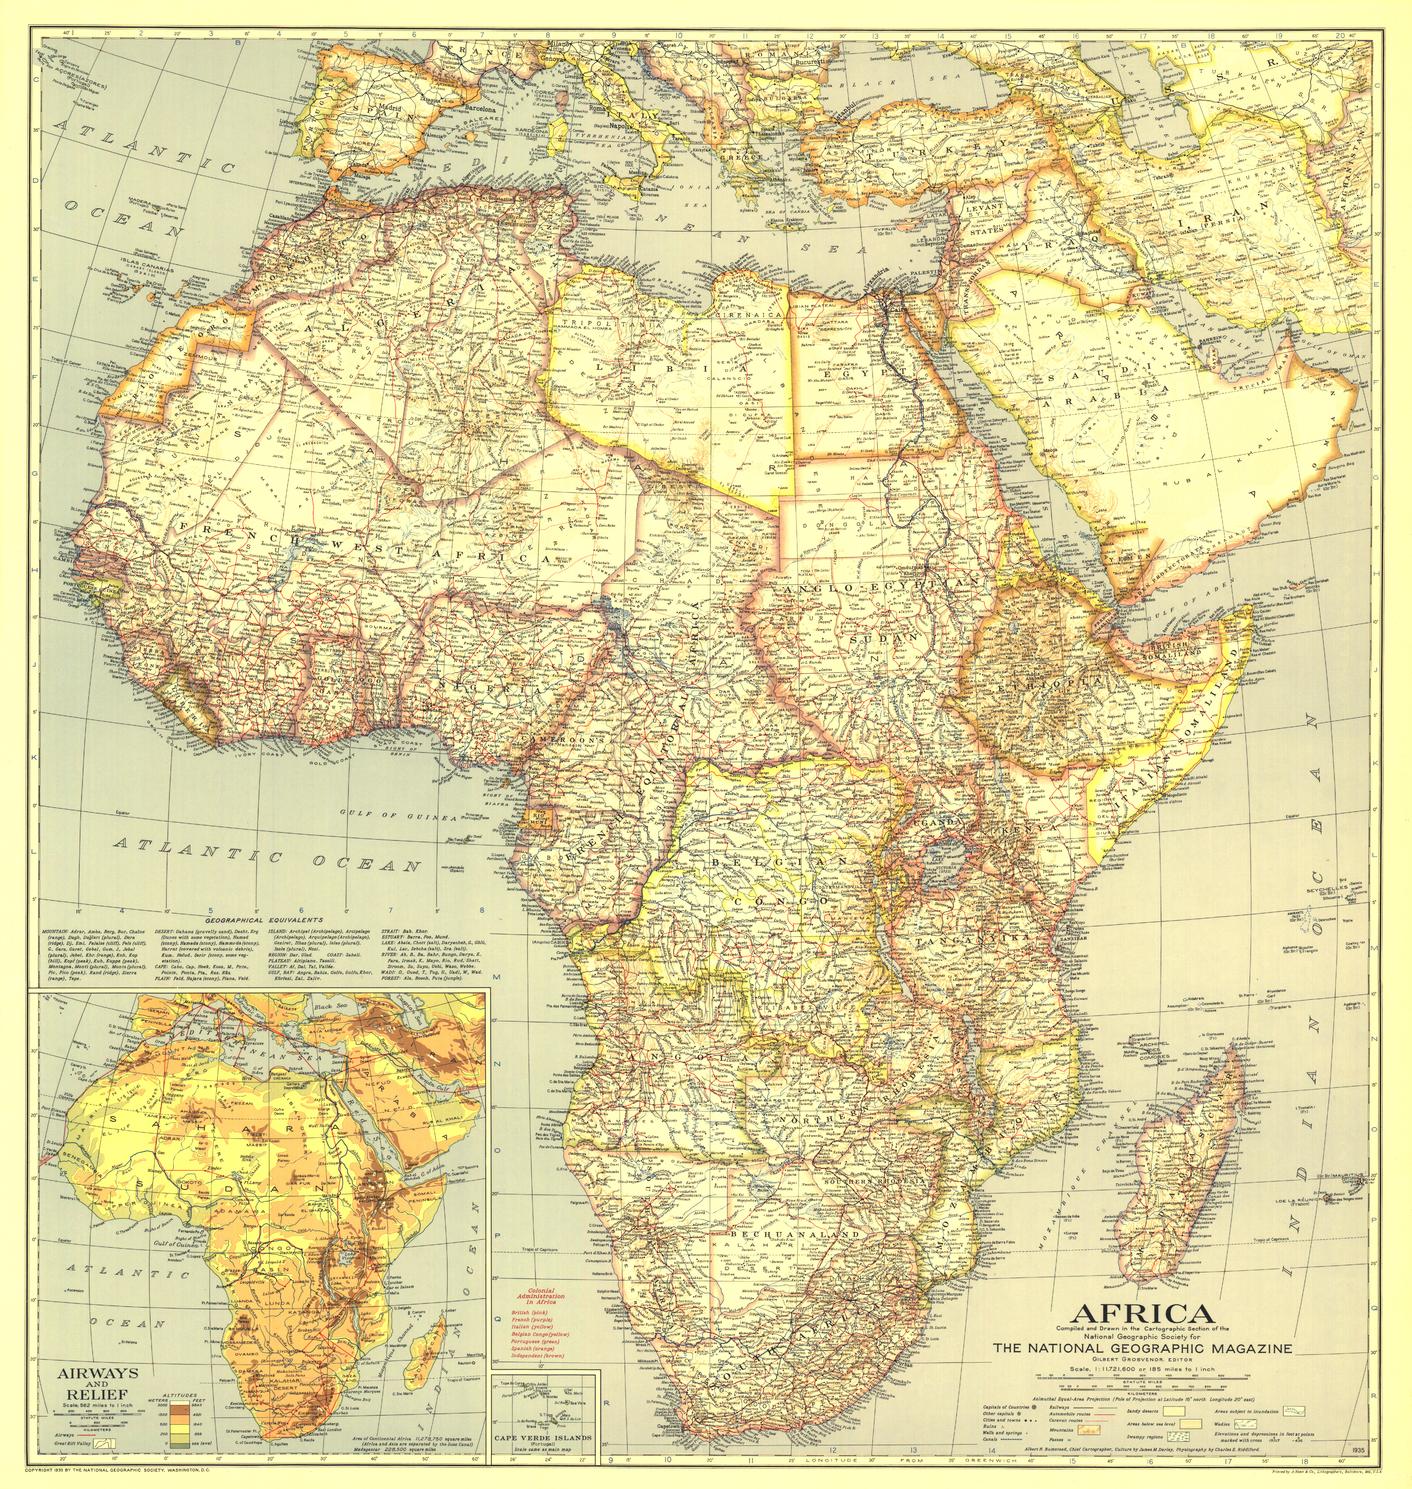 Africa Map Published 1935 National Geographic Maps